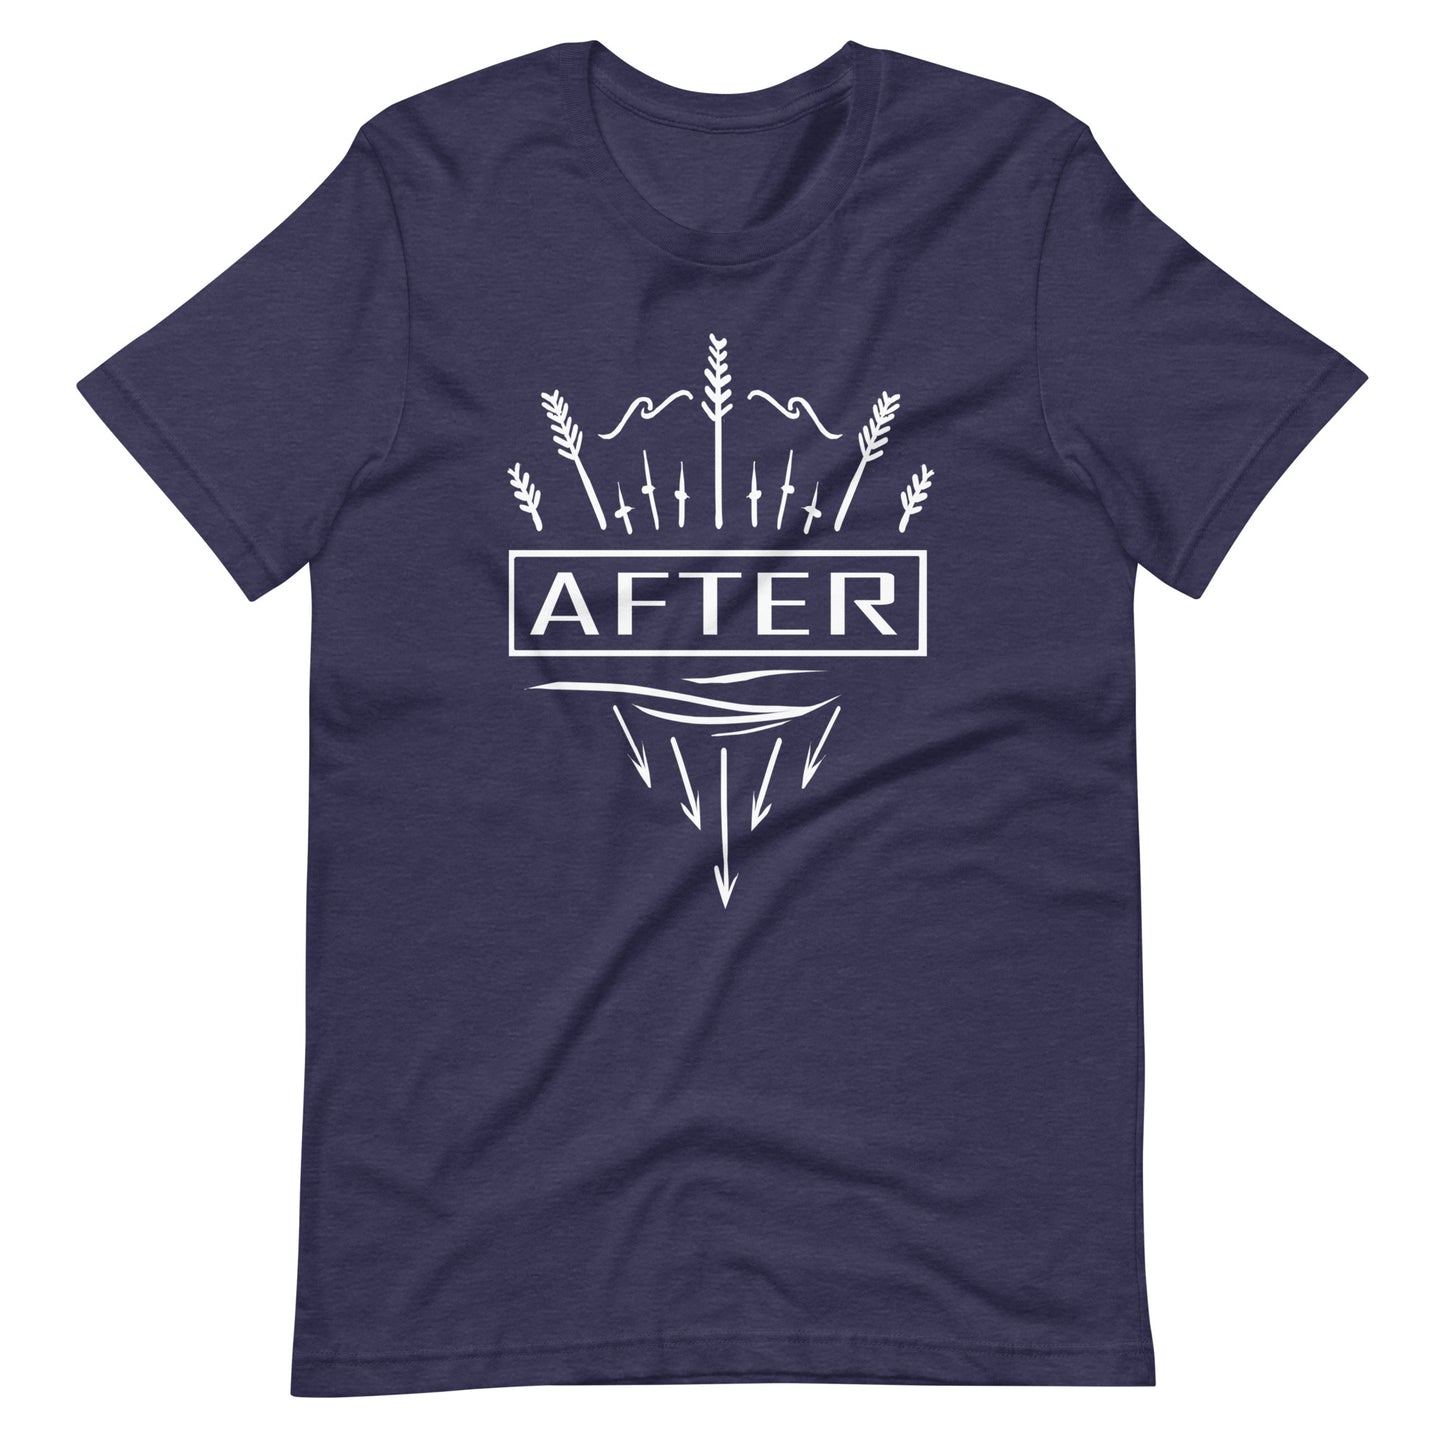 After - Men's t-shirt - Heather Midnight Navy Front